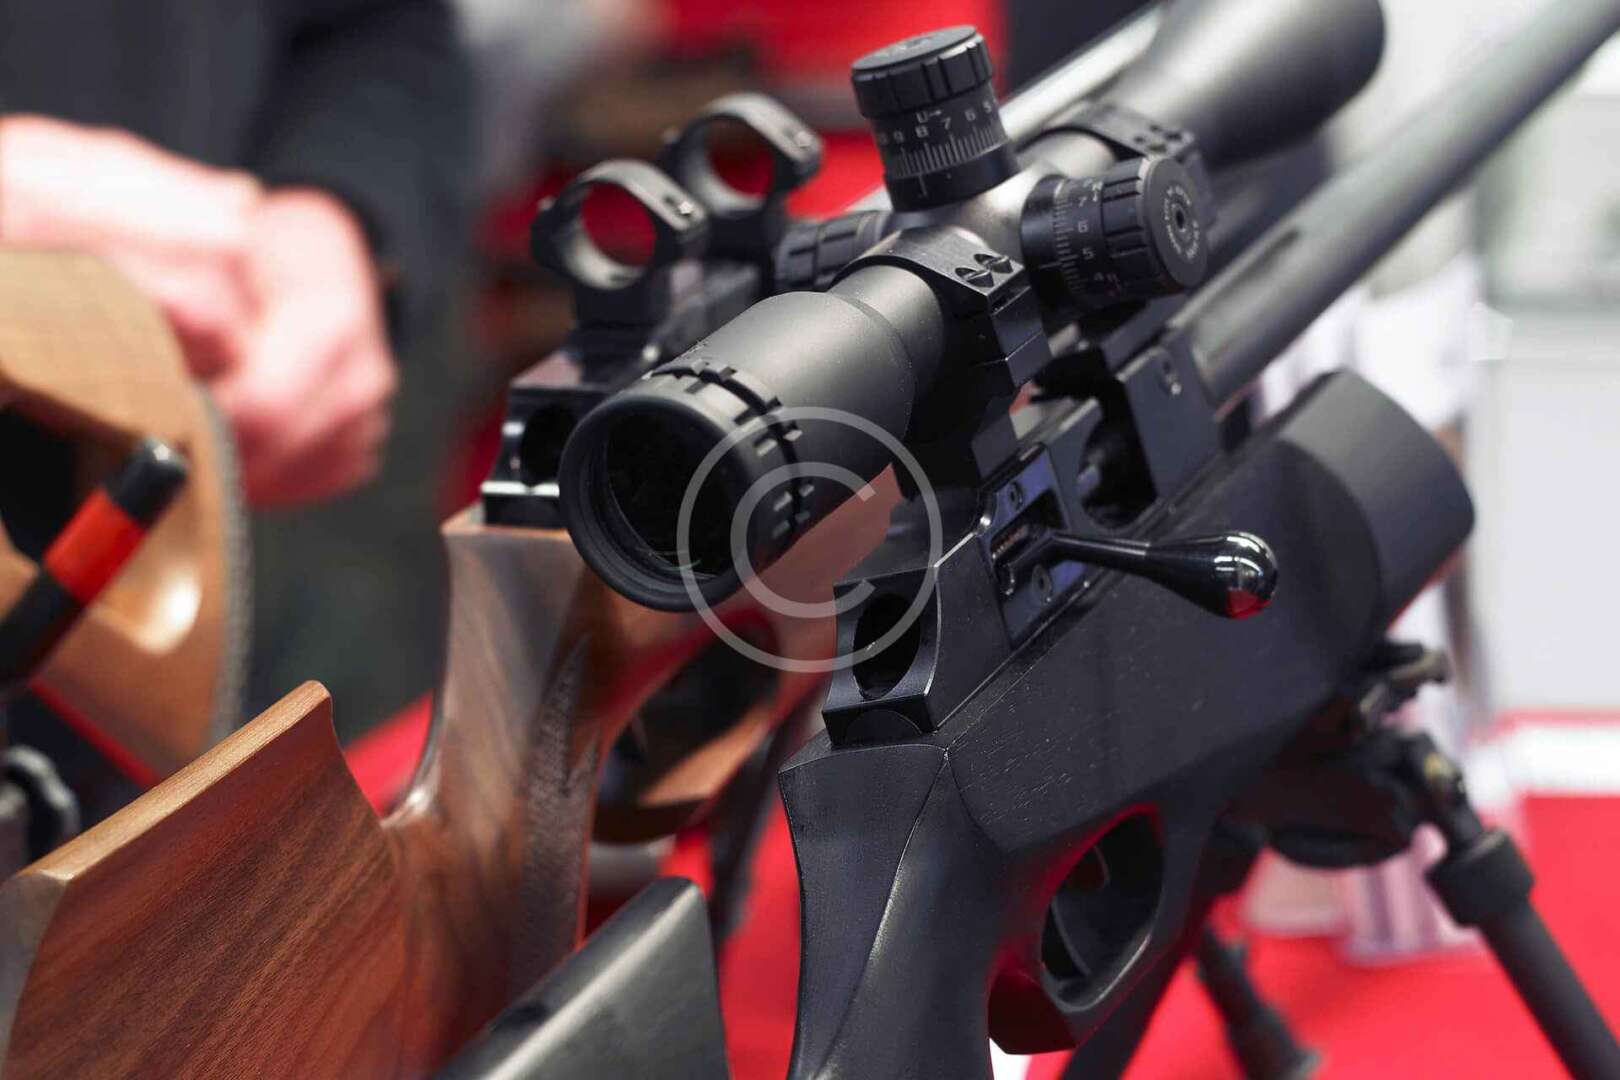 A rifle with a scope is on display at a gun show.